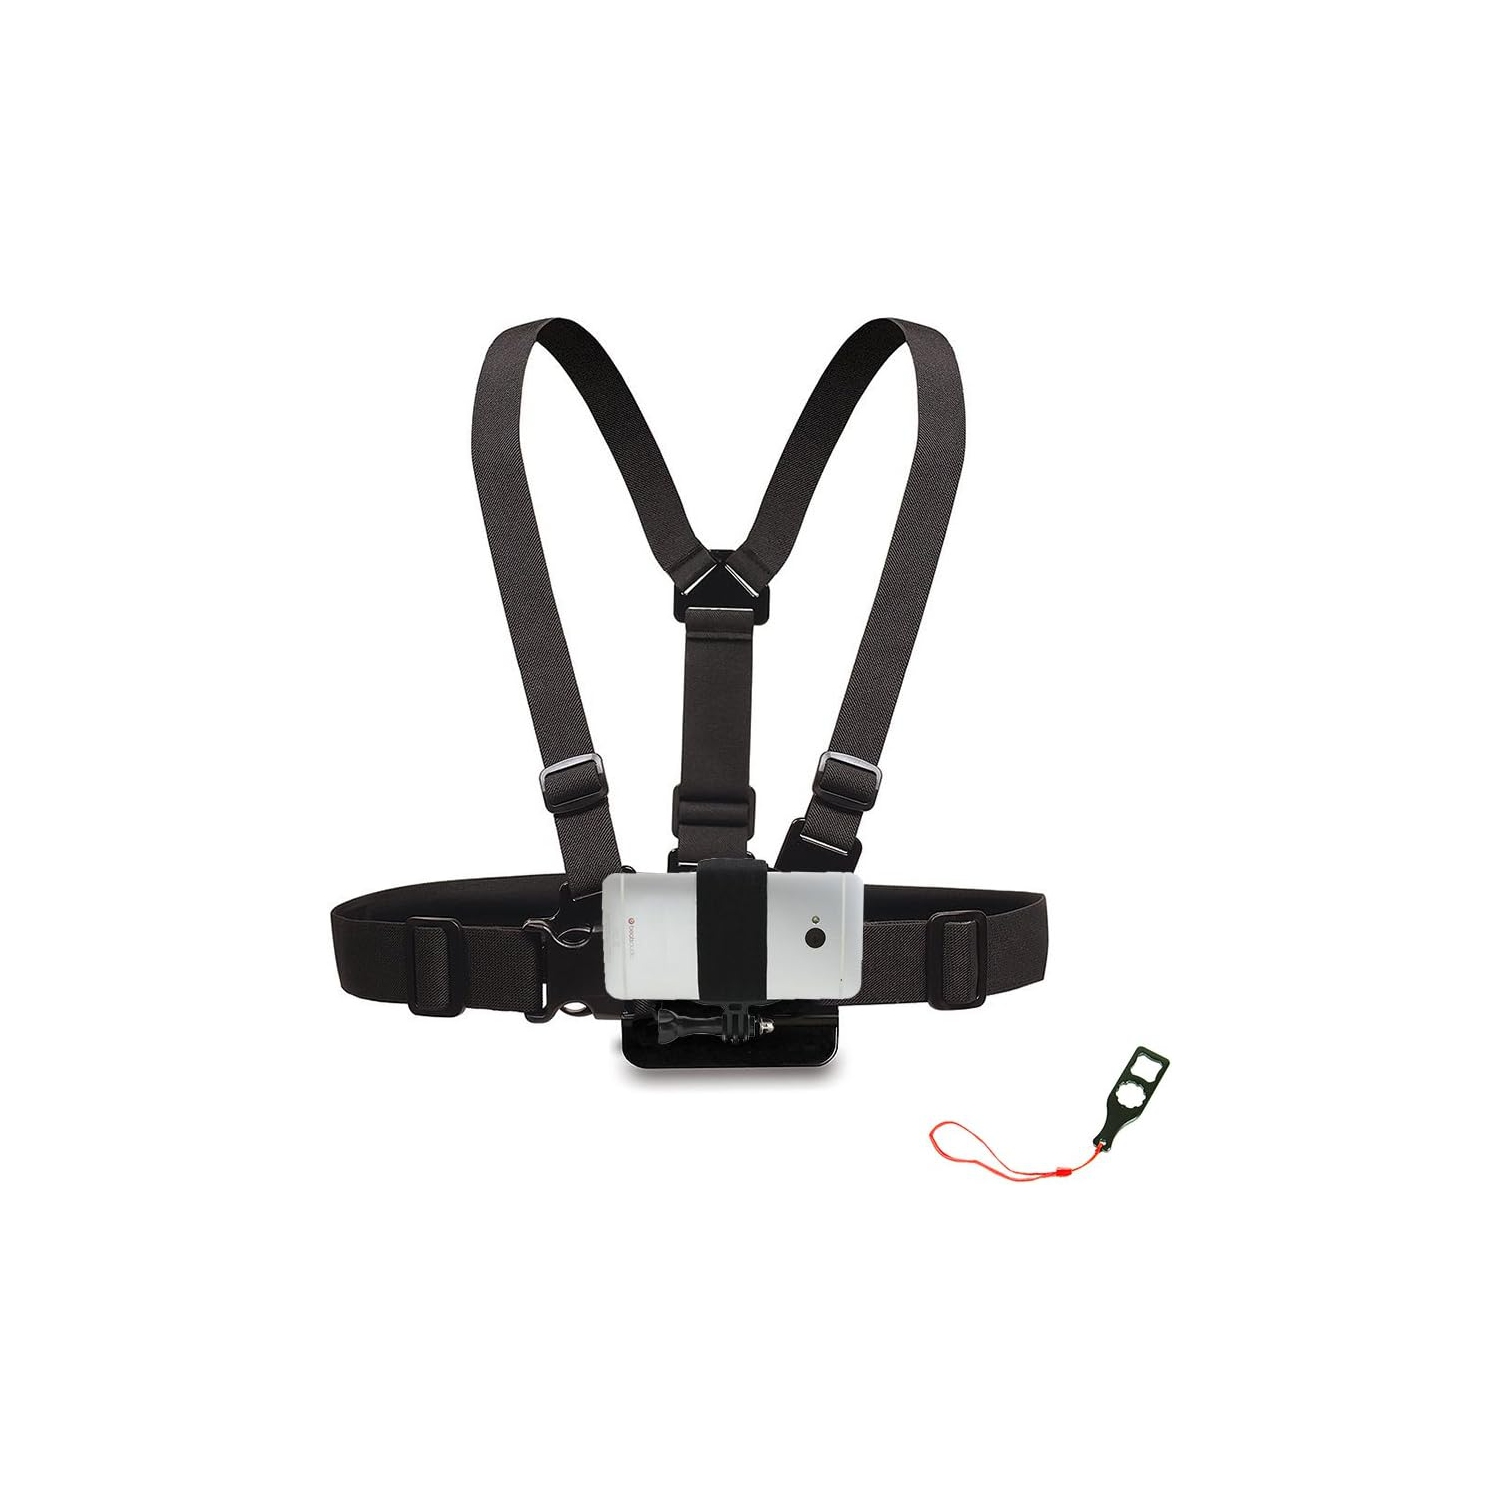 Gopro Chest Mount with ® Adapter for Smartphone, W/j-hook & Screw, Operable with Any Smartphone. Strongest